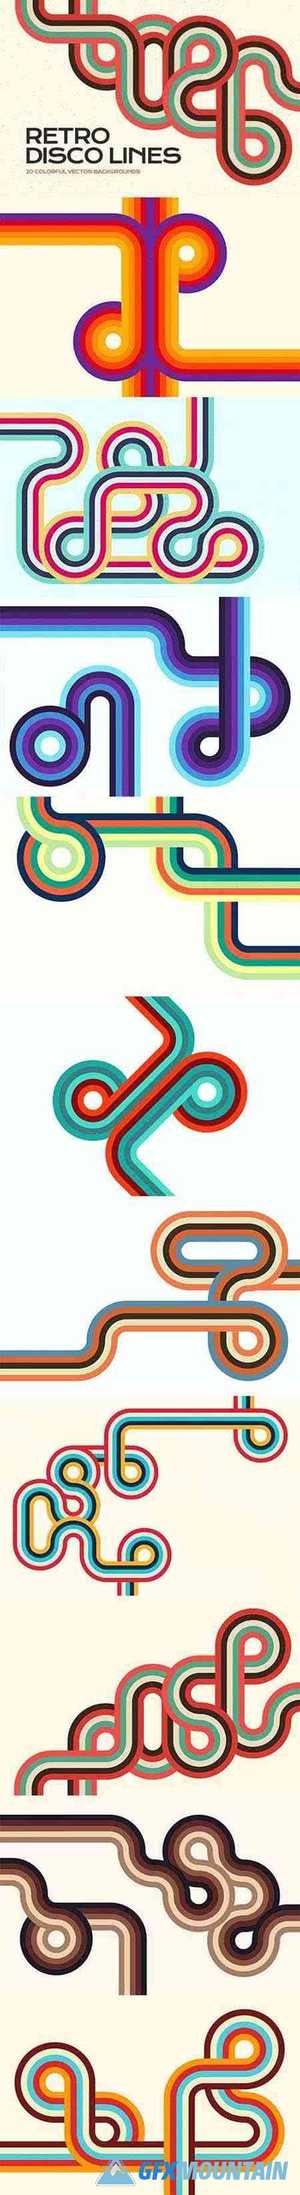 Retro Disco Lines Vector Backgrounds Pack